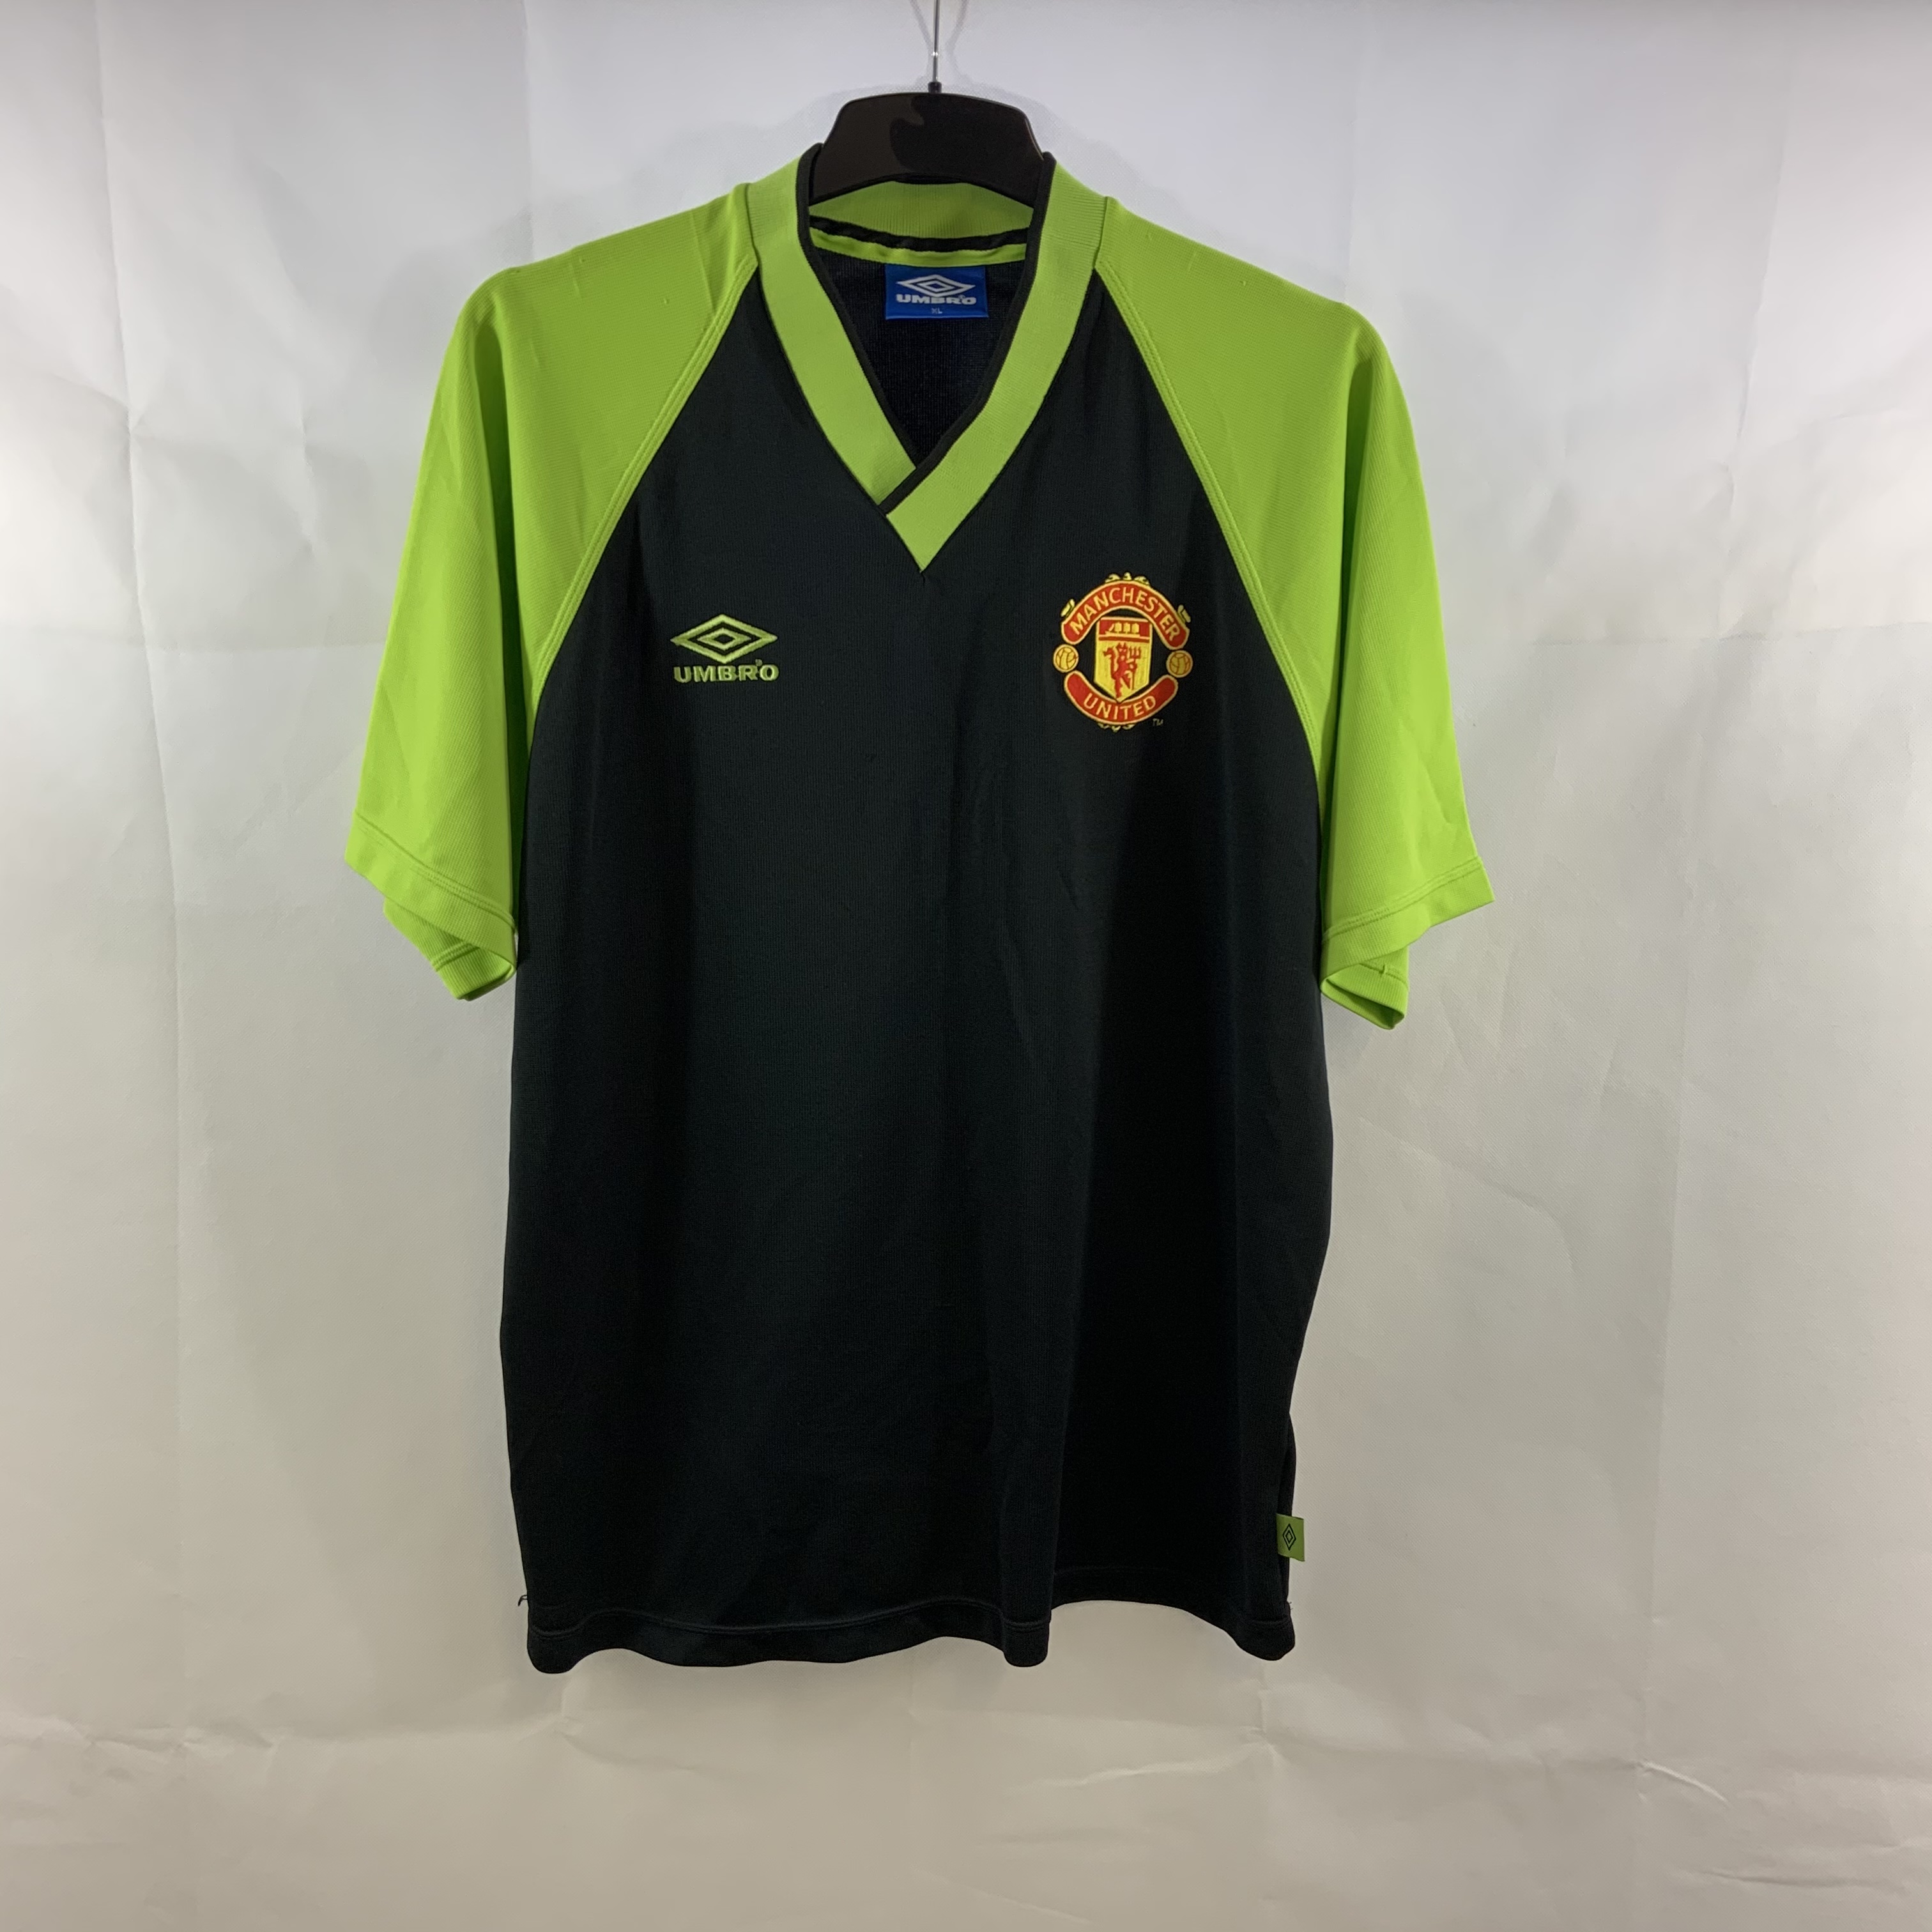 Manchester United Umbro Drill Top XL